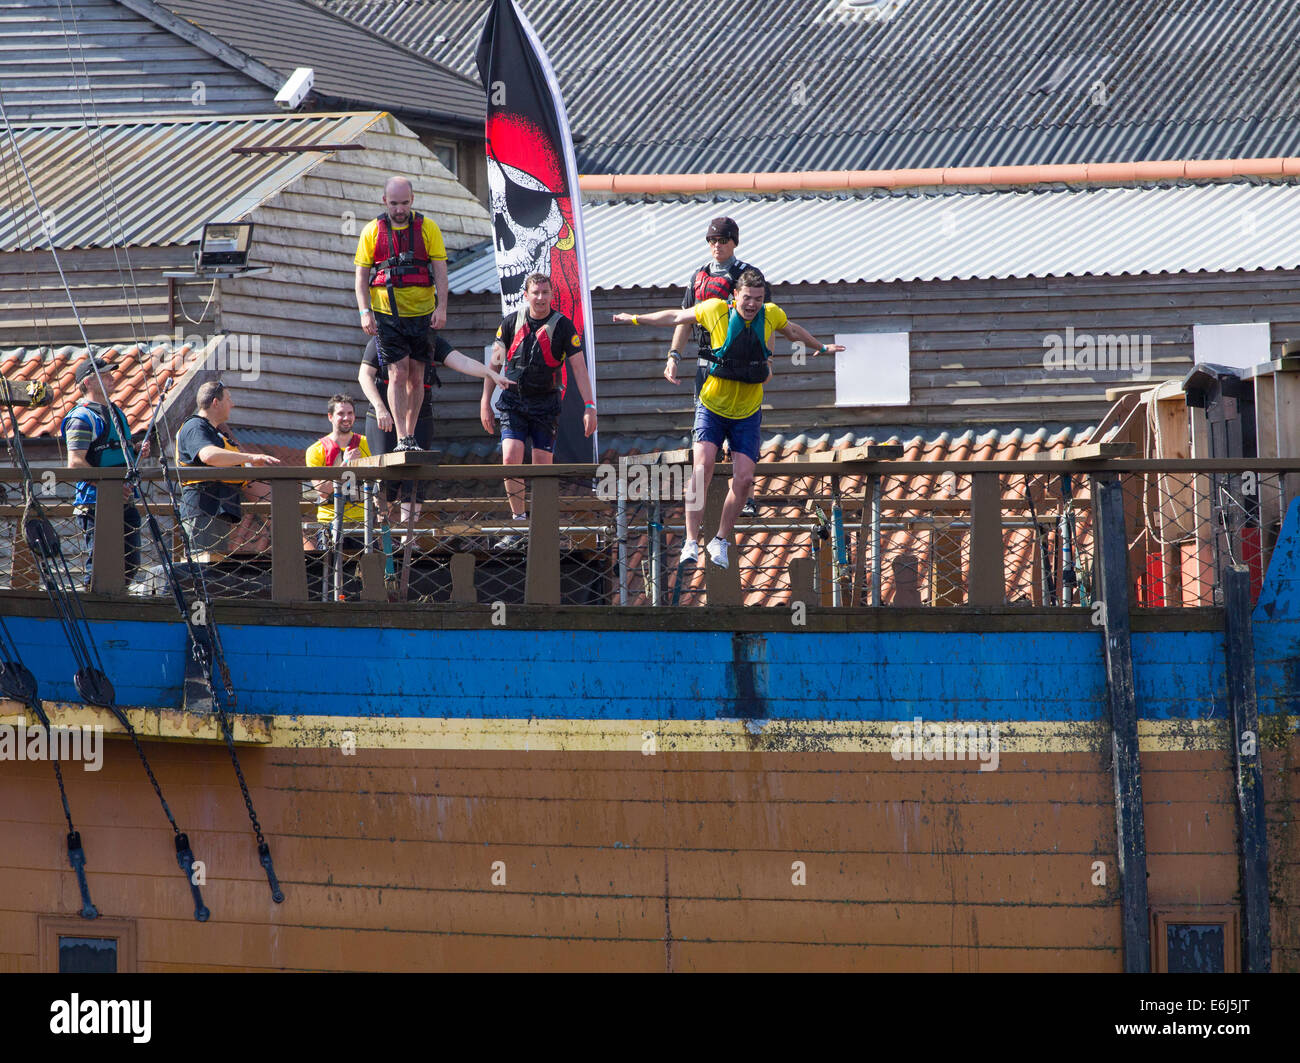 Stockton on Tees, UK. 24th August, 2014. Competitors walking the plank on HMS Endeavour replica  at the 2014 Stockton River Rat Race, a 10km run with land and water obstacles along the banks of the river Tees. Credit:  ALANDAWSONPHOTOGRAPHY/Alamy Live News Stock Photo